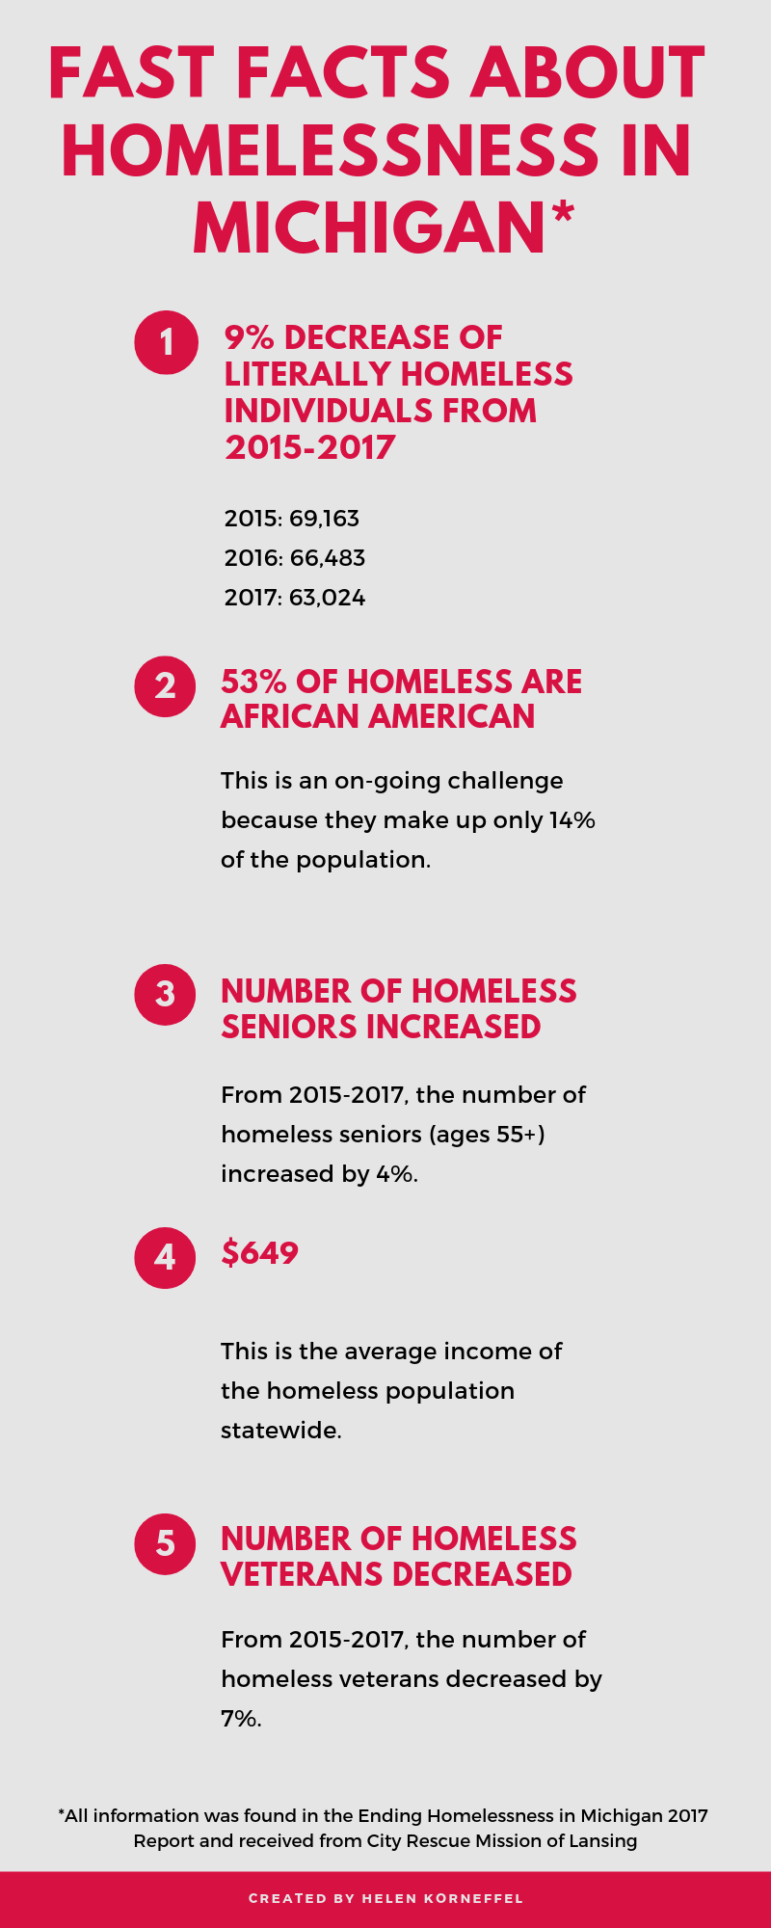 Fast Facts About Homelessness in Michigan